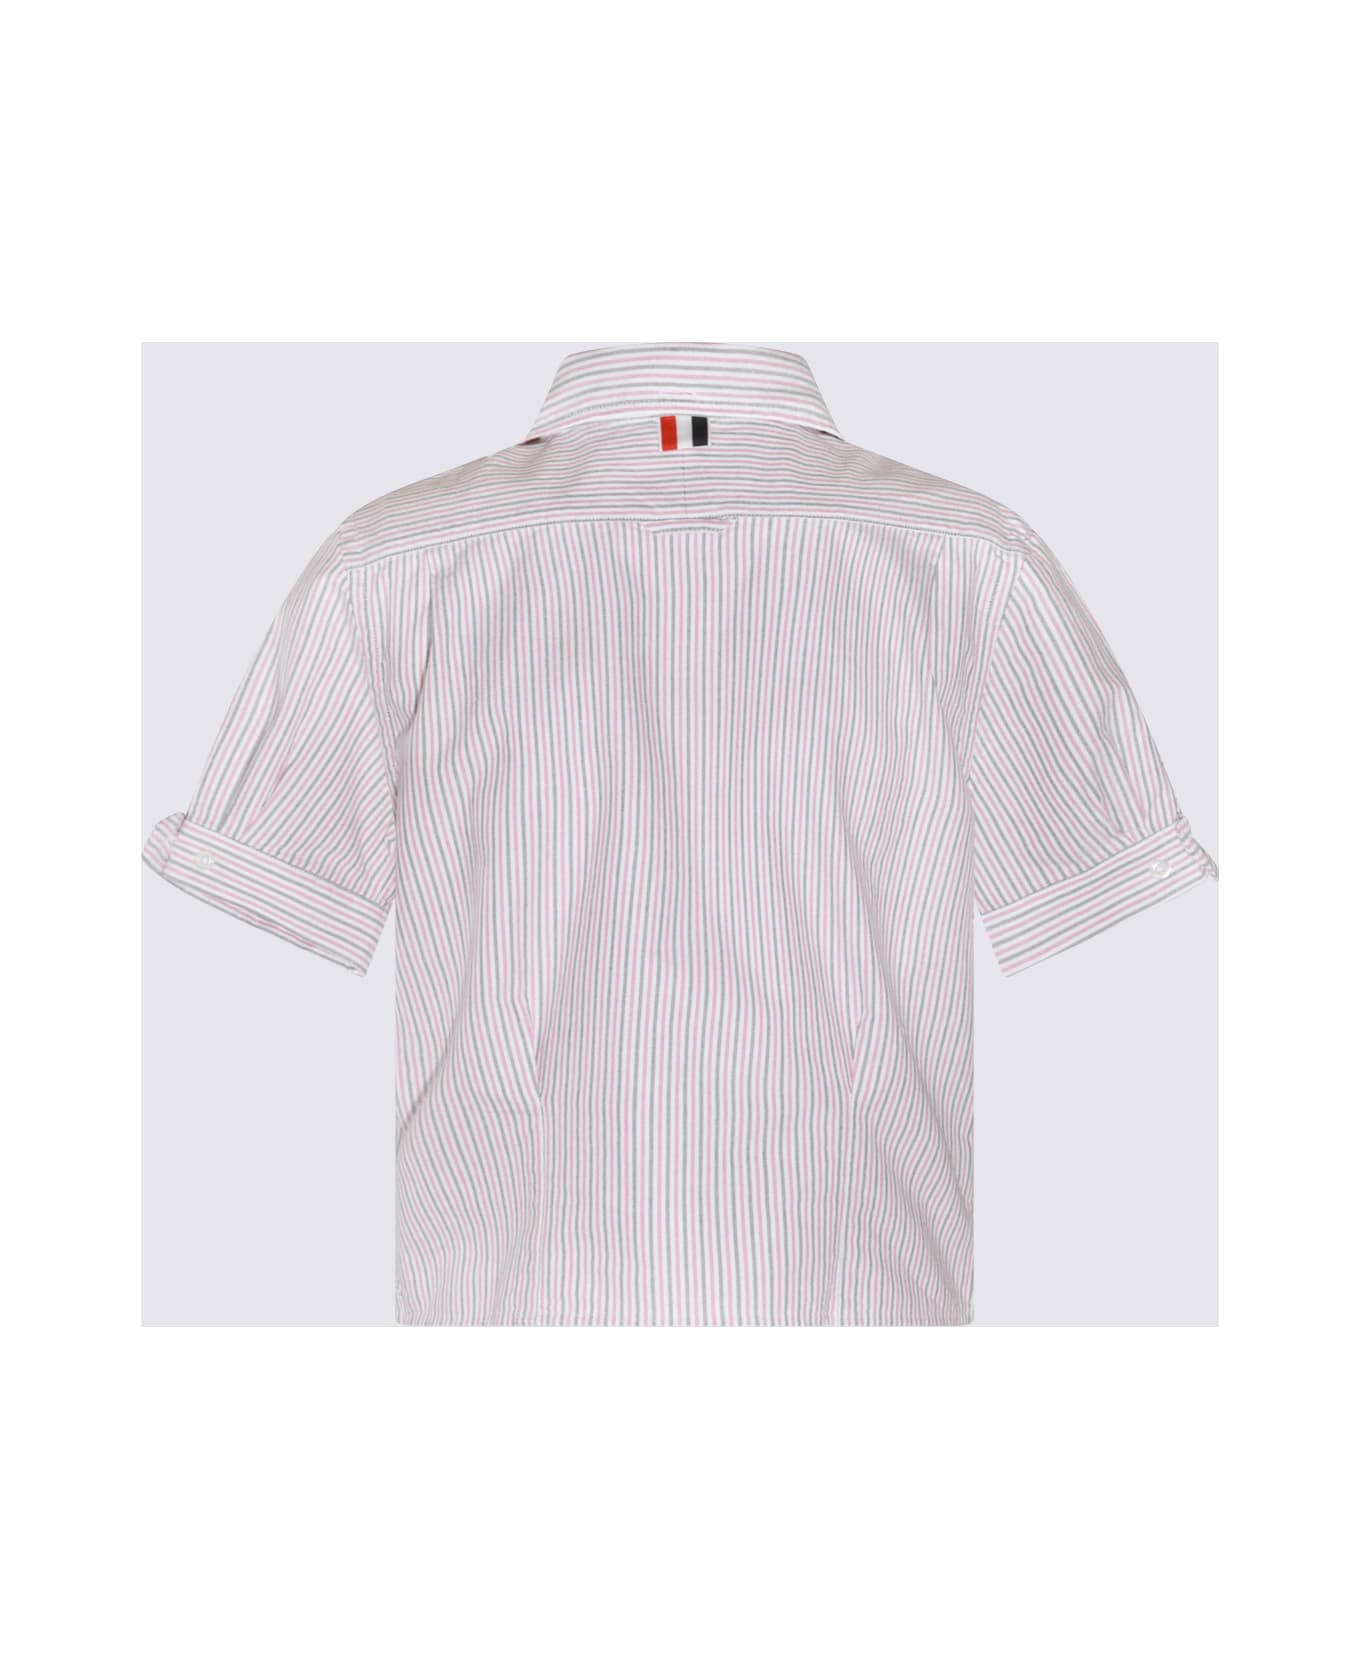 Thom Browne Multicolour Cotton Shirt - Red